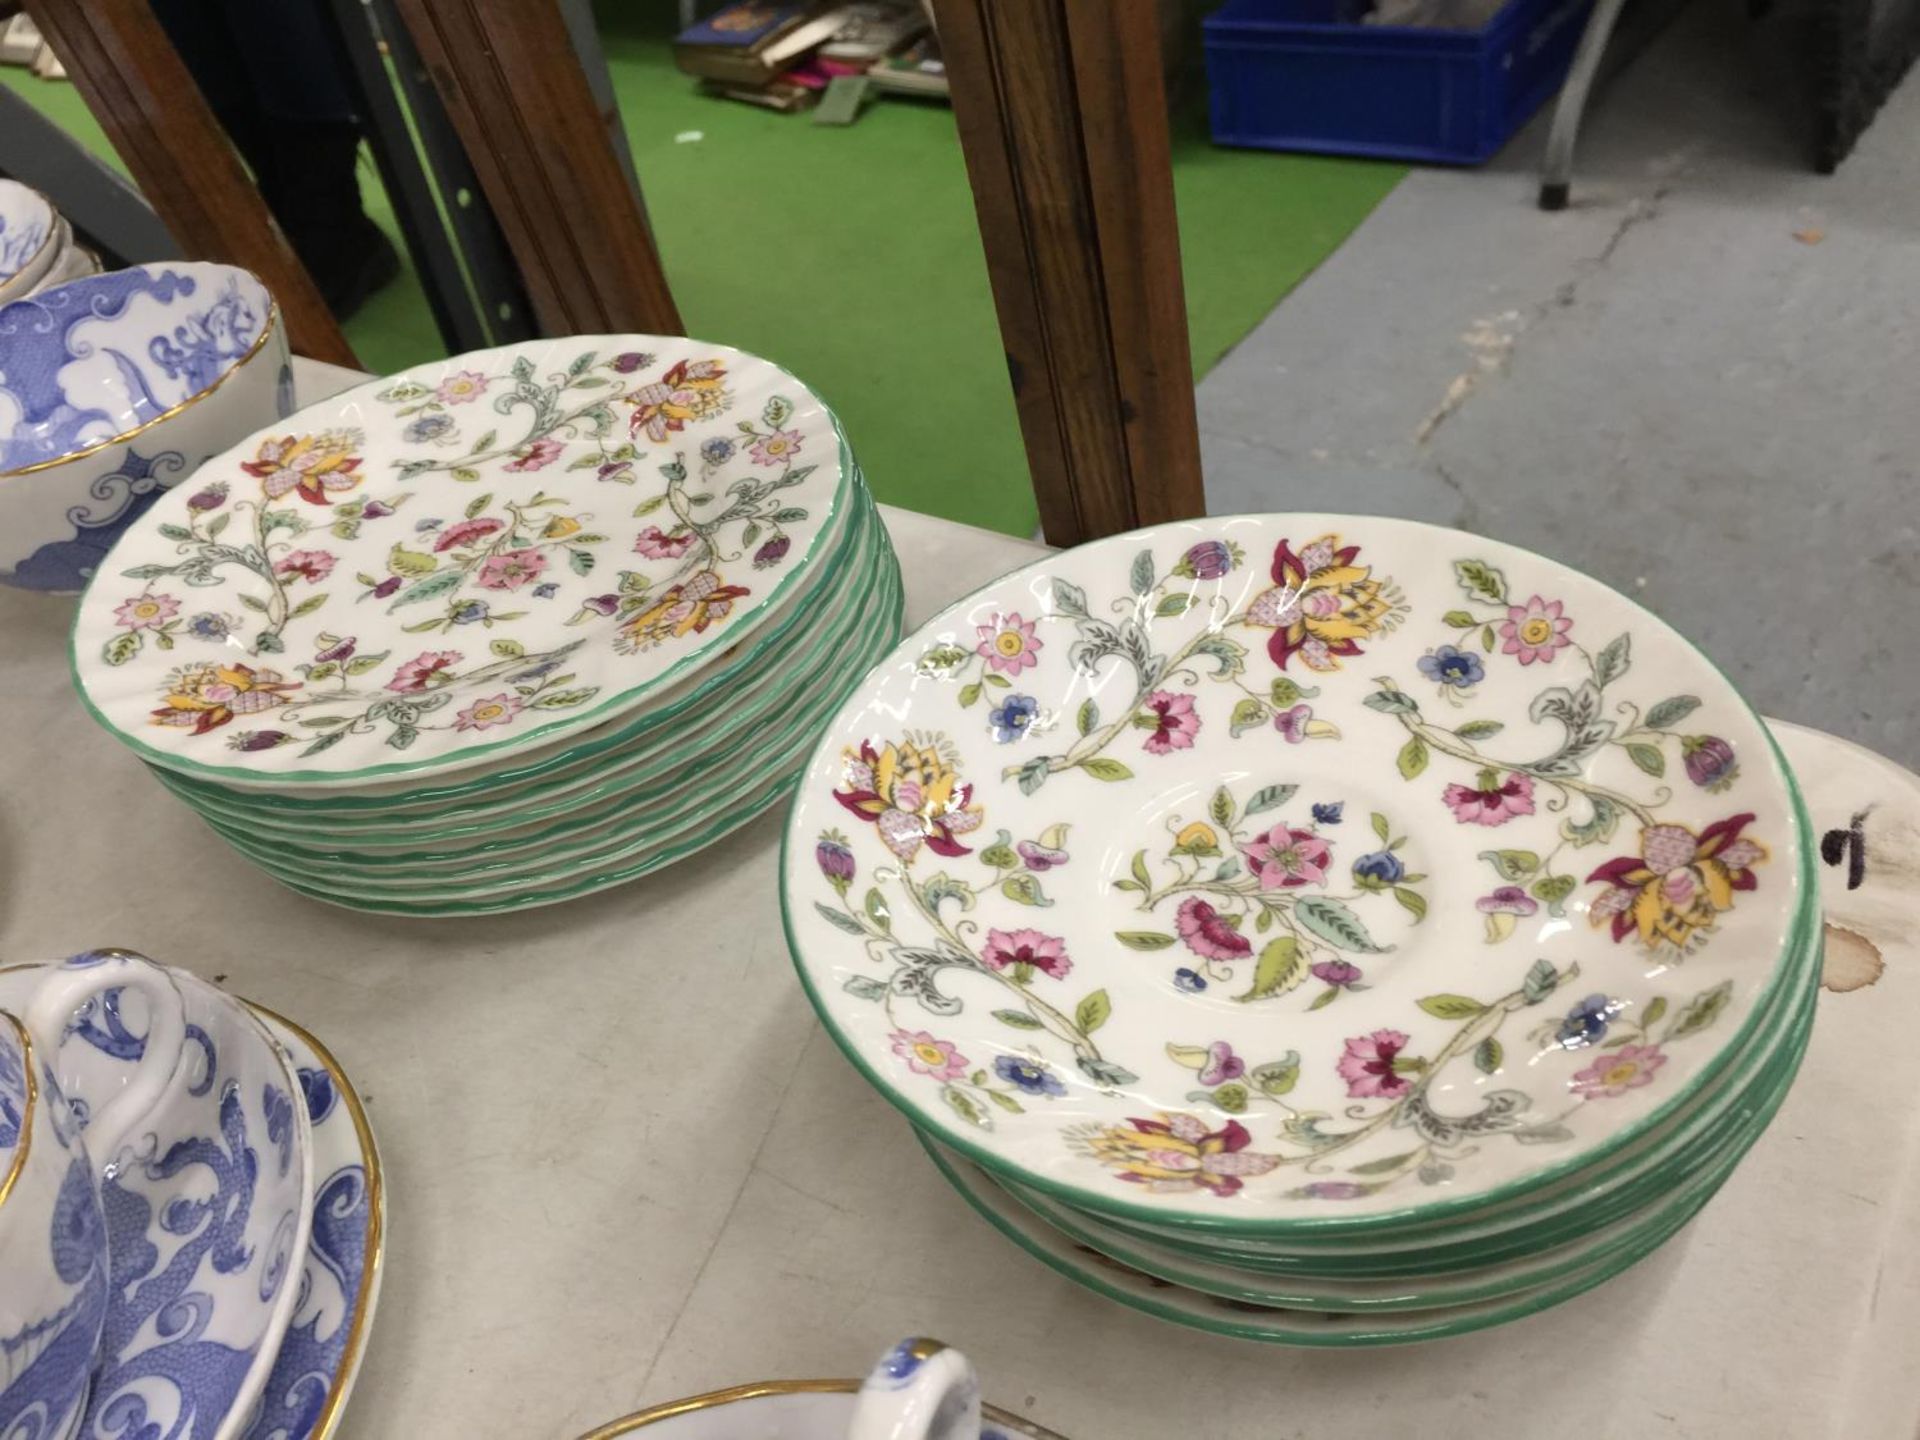 A QUANTITY OF ROYAL WORCESTER BLUE PATTERN TEACUPS, SAUCERS, PLATES, ETC, AYNSLEY 'HENLEY' PLATES - Image 3 of 6